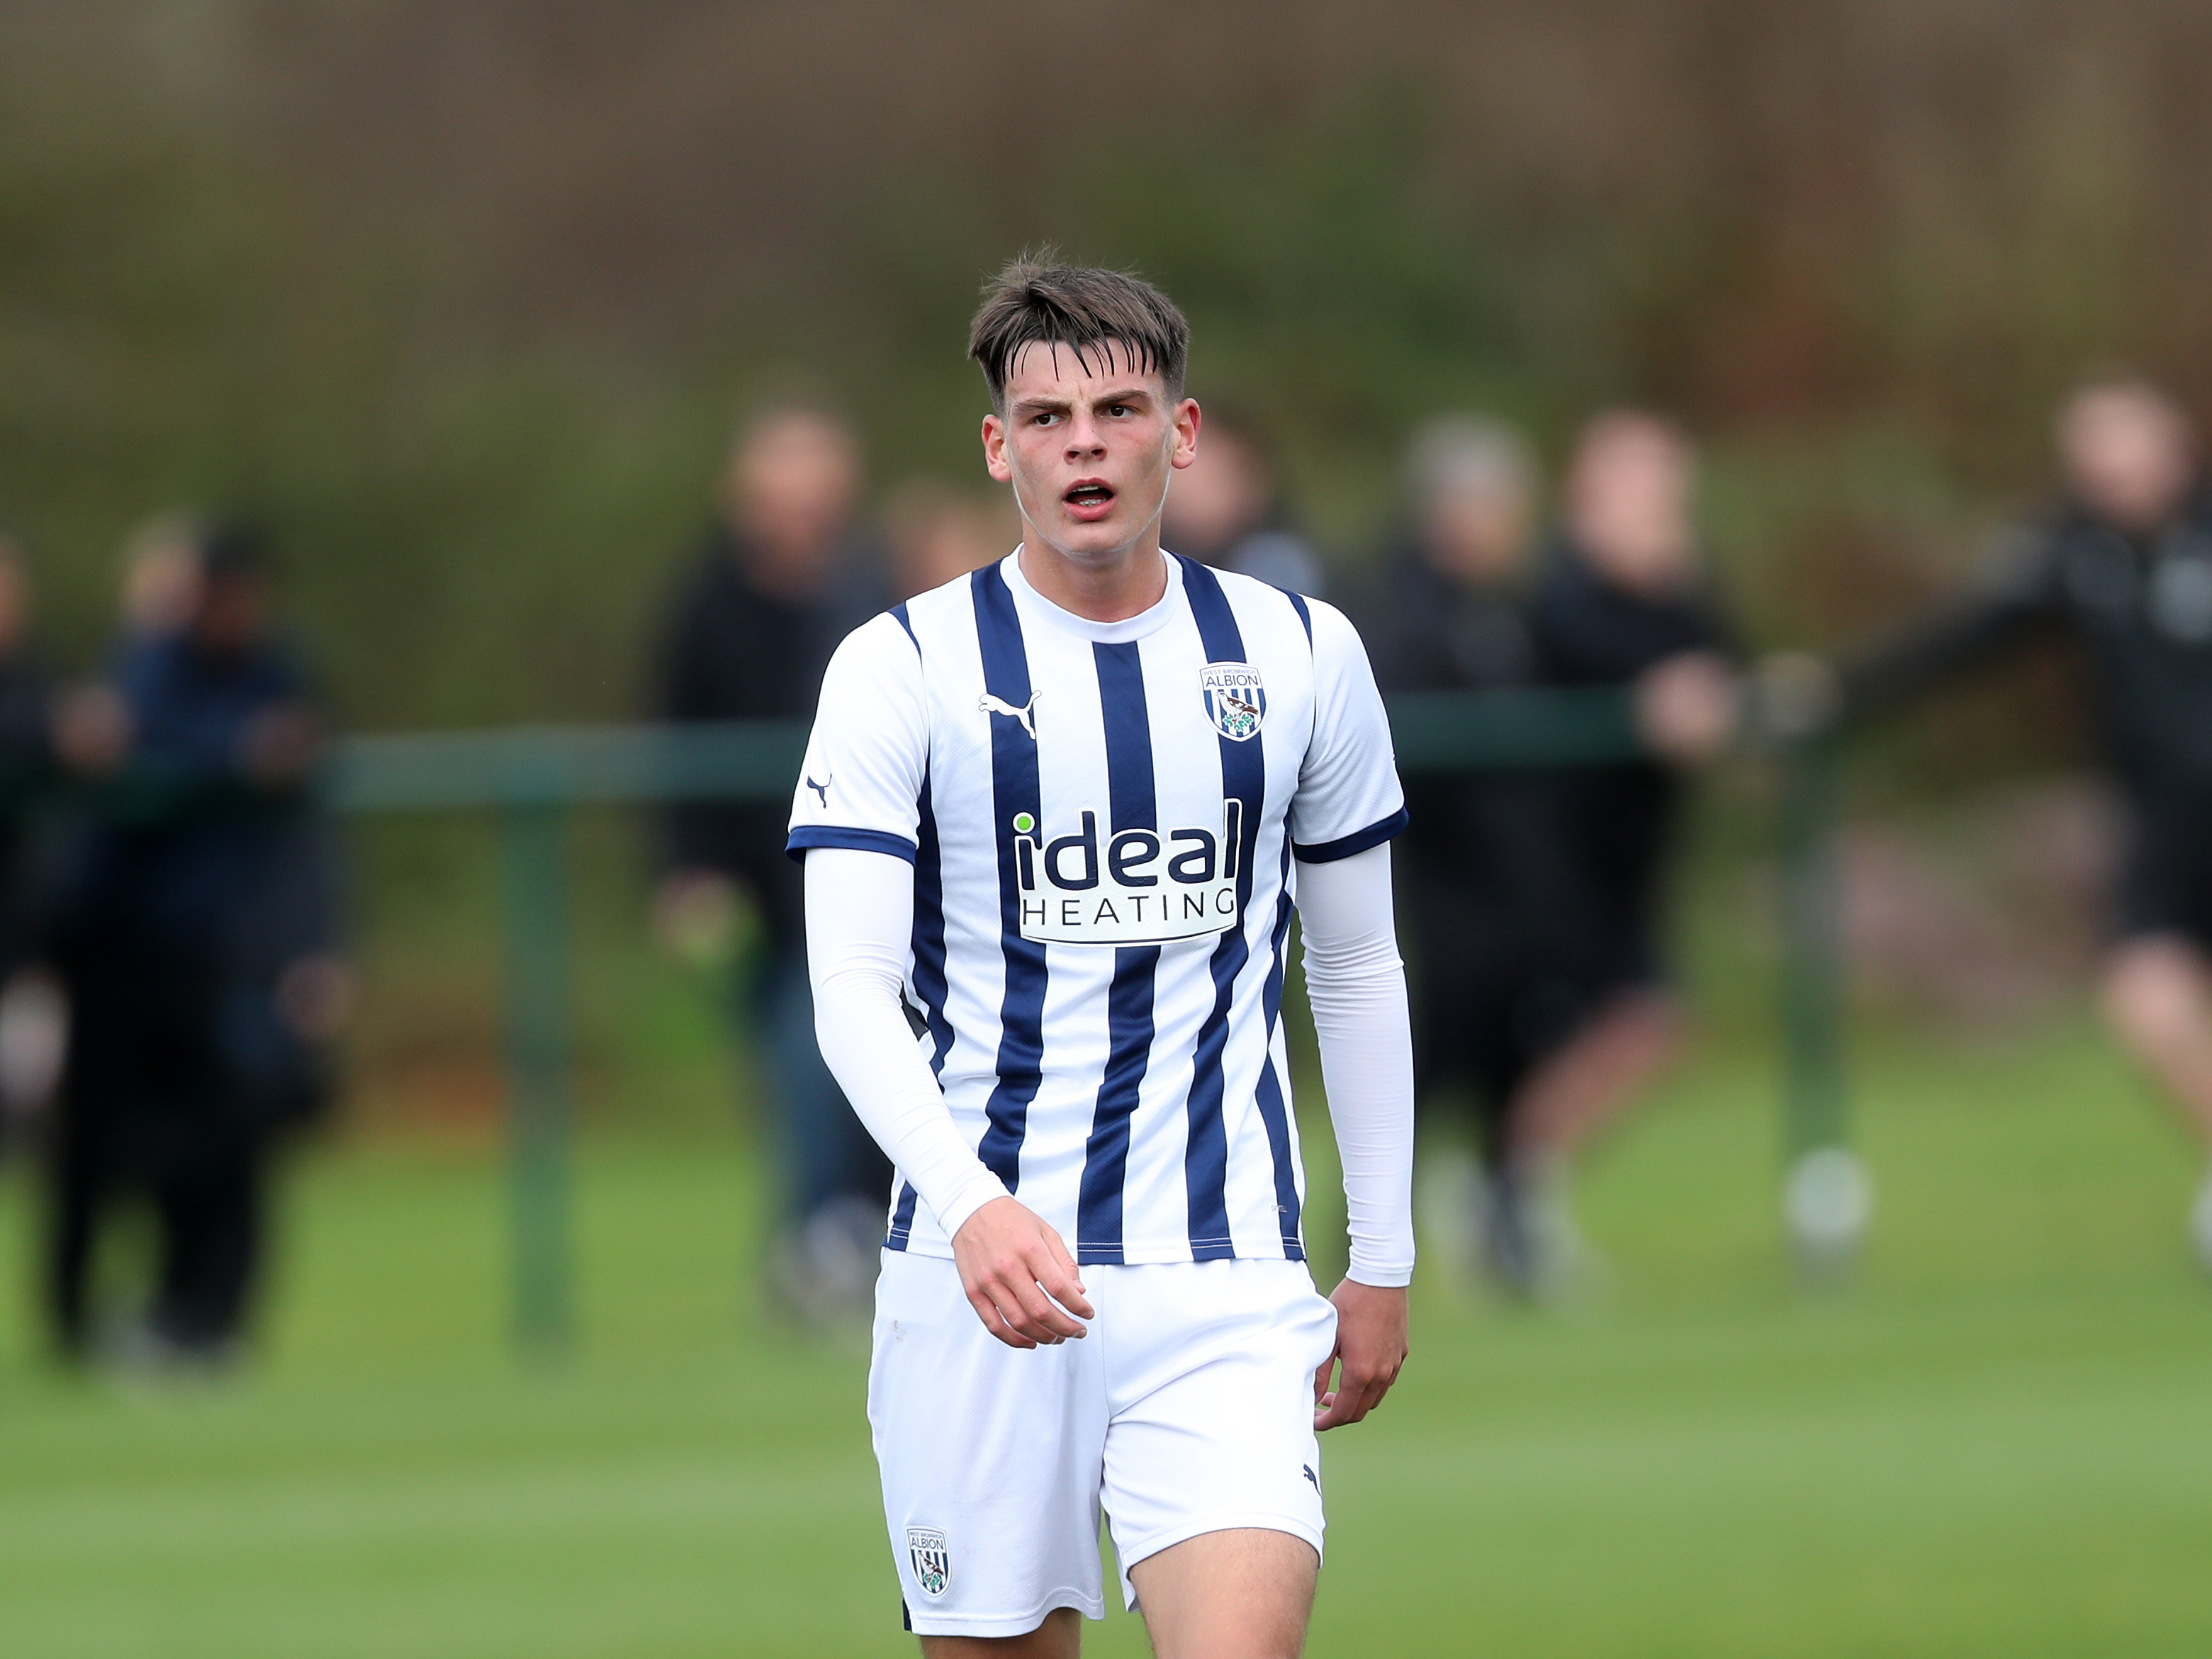 Archie Kirton in action for Albion's U18 team wearing the home kit